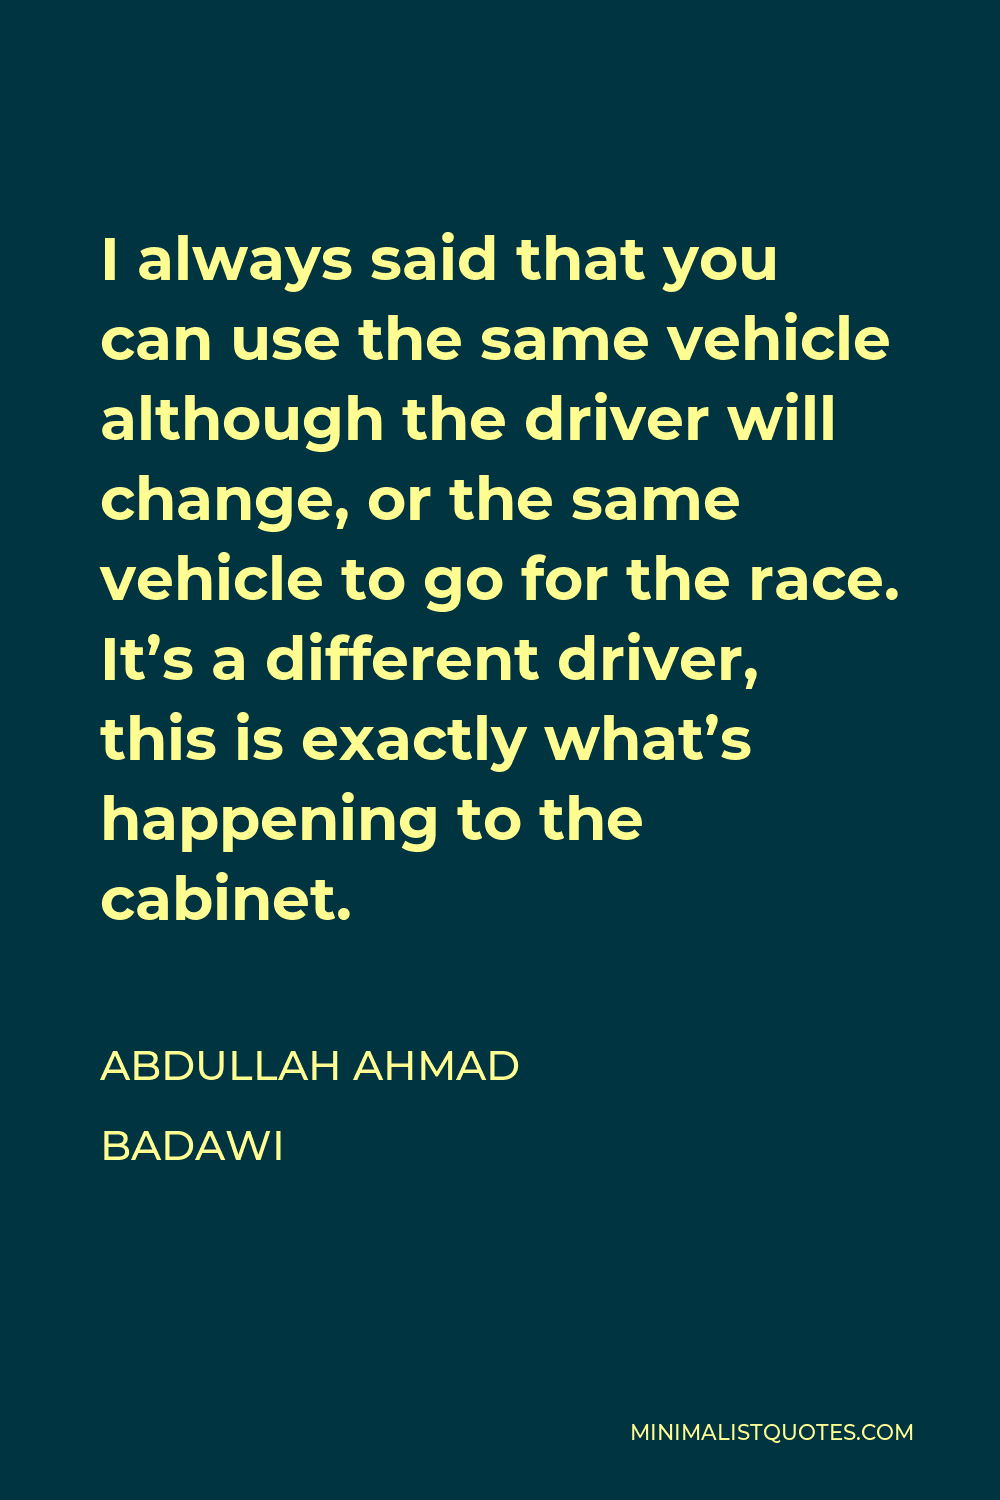 Abdullah Ahmad Badawi Quote - I always said that you can use the same vehicle although the driver will change, or the same vehicle to go for the race. It’s a different driver, this is exactly what’s happening to the cabinet.